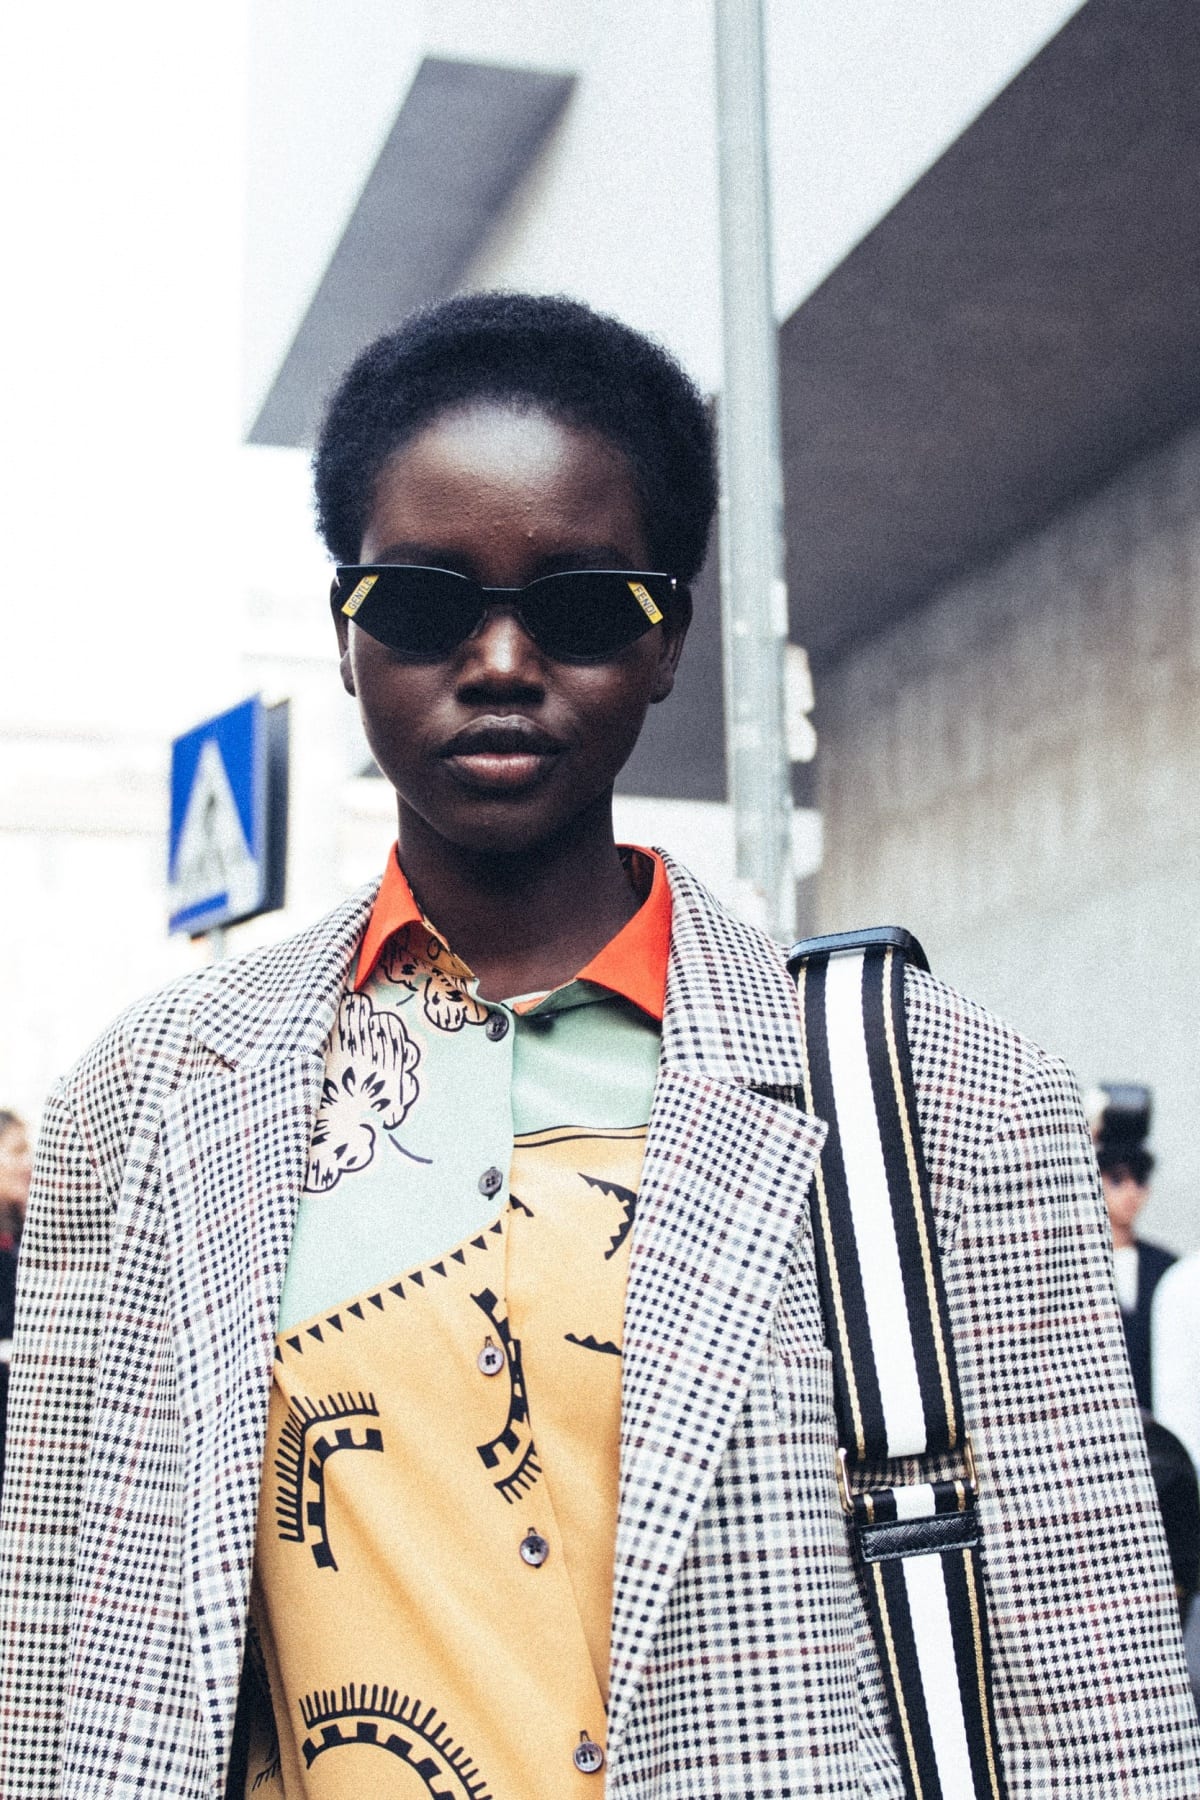 Get to know the faces of Milan Fashion Week - RUSSH